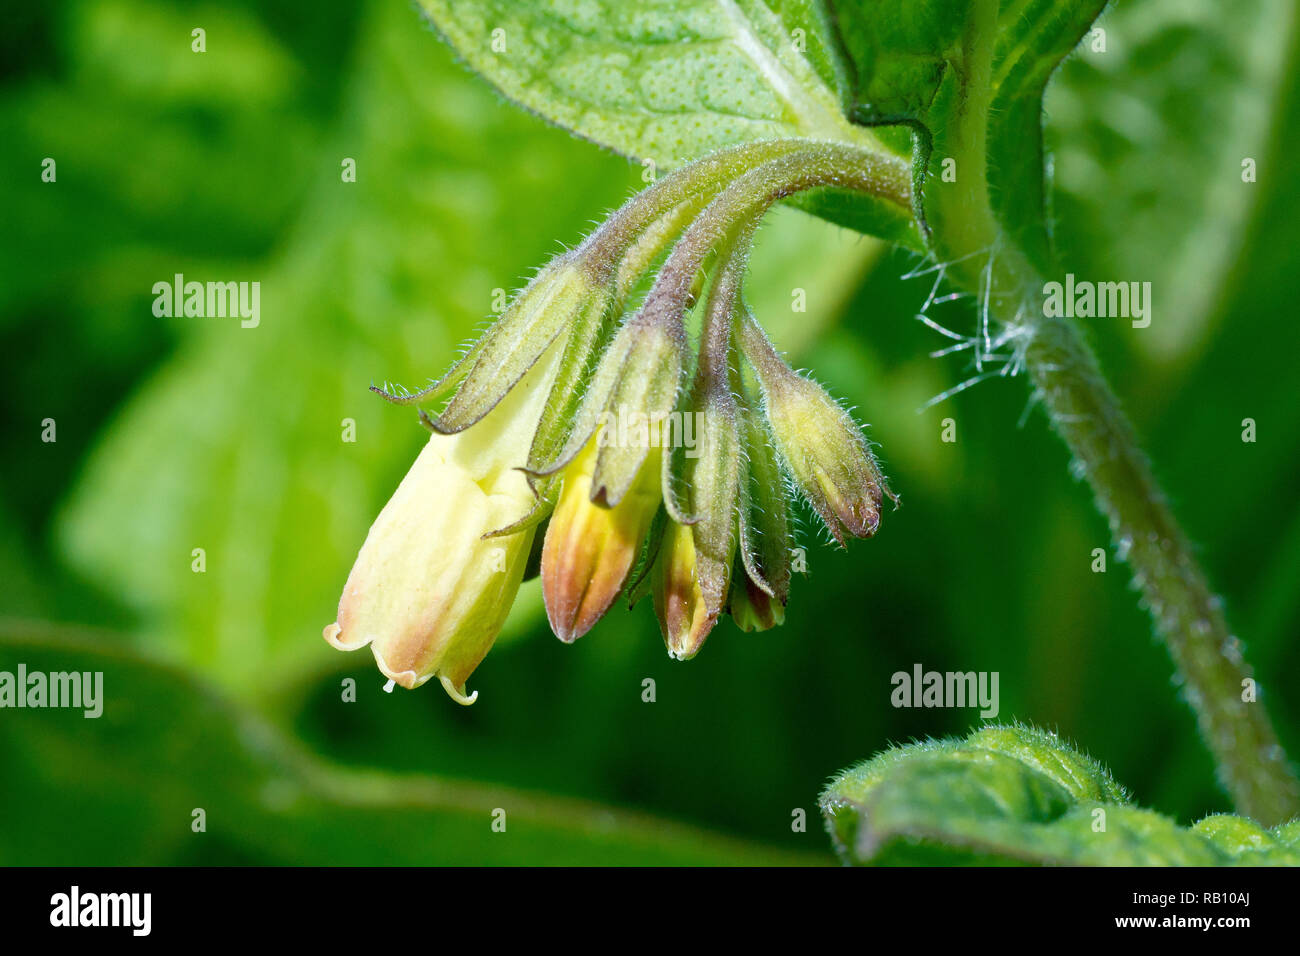 Comfrey, most likely Tuberous Comfrey (symphytum tuberosum), close up of a single flowering head. Stock Photo